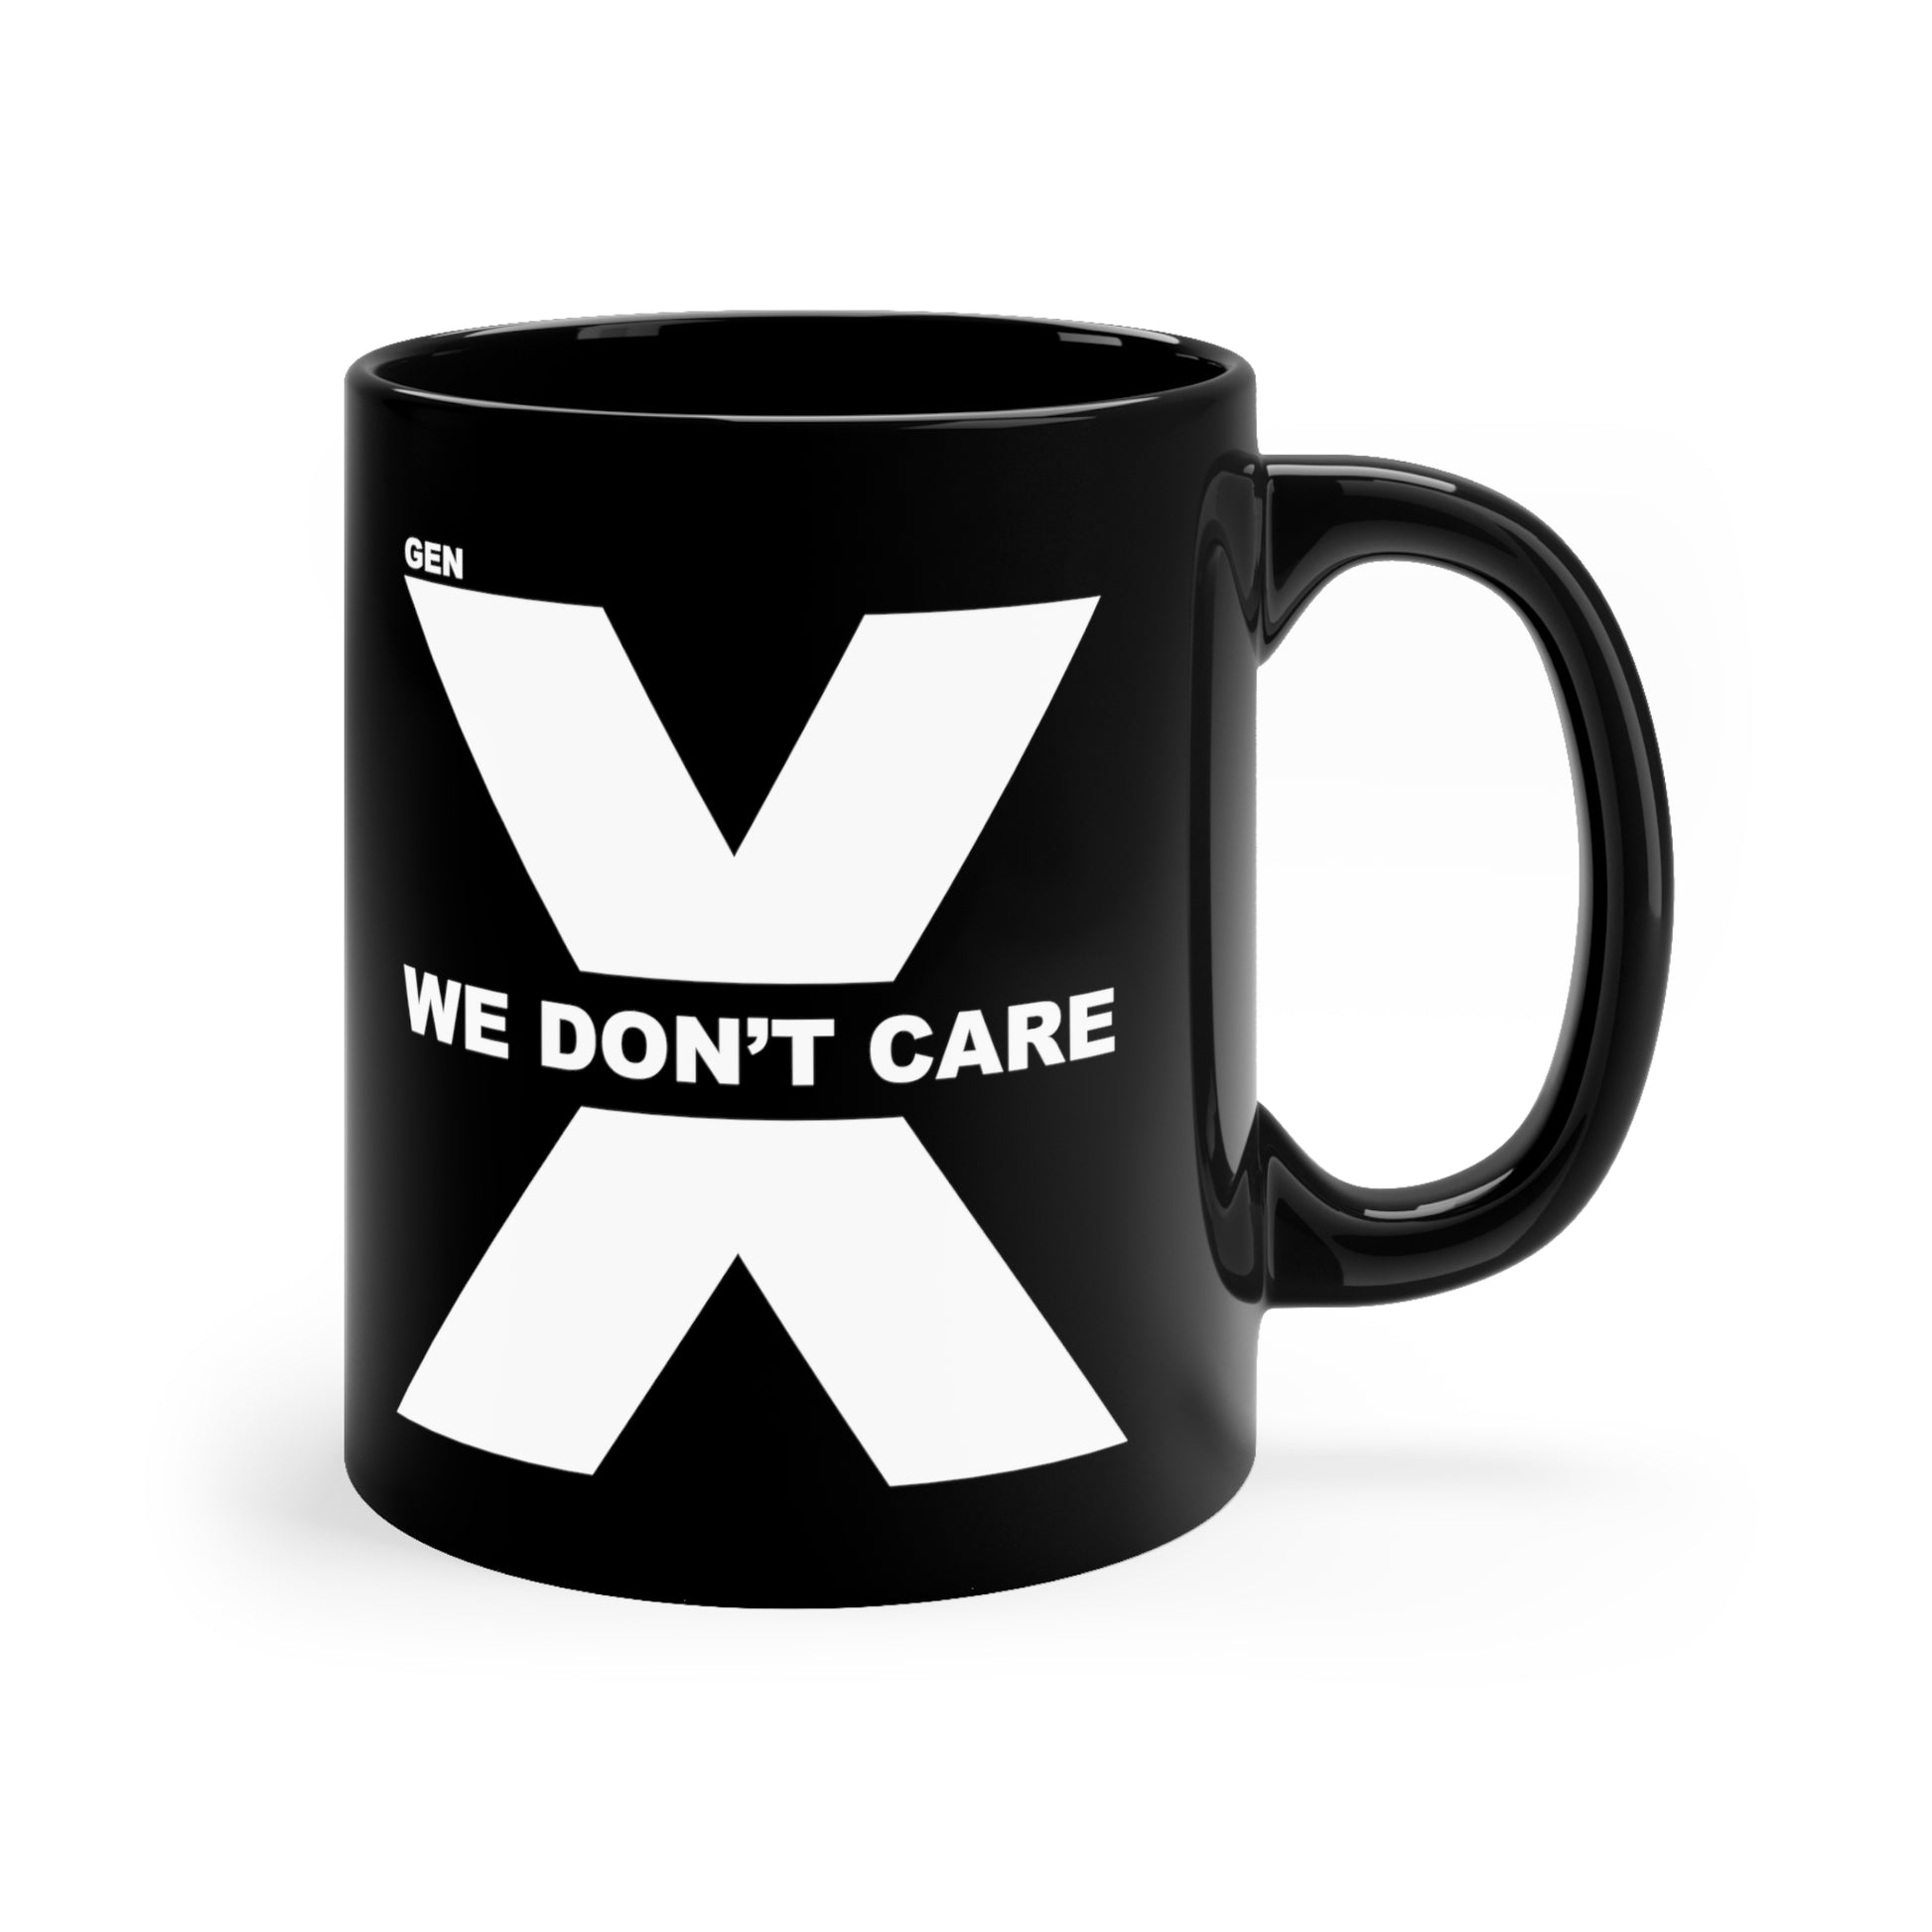 Generation Mood's exclusive Gen X mug combines retro vibes with a modern edge. 2 sided